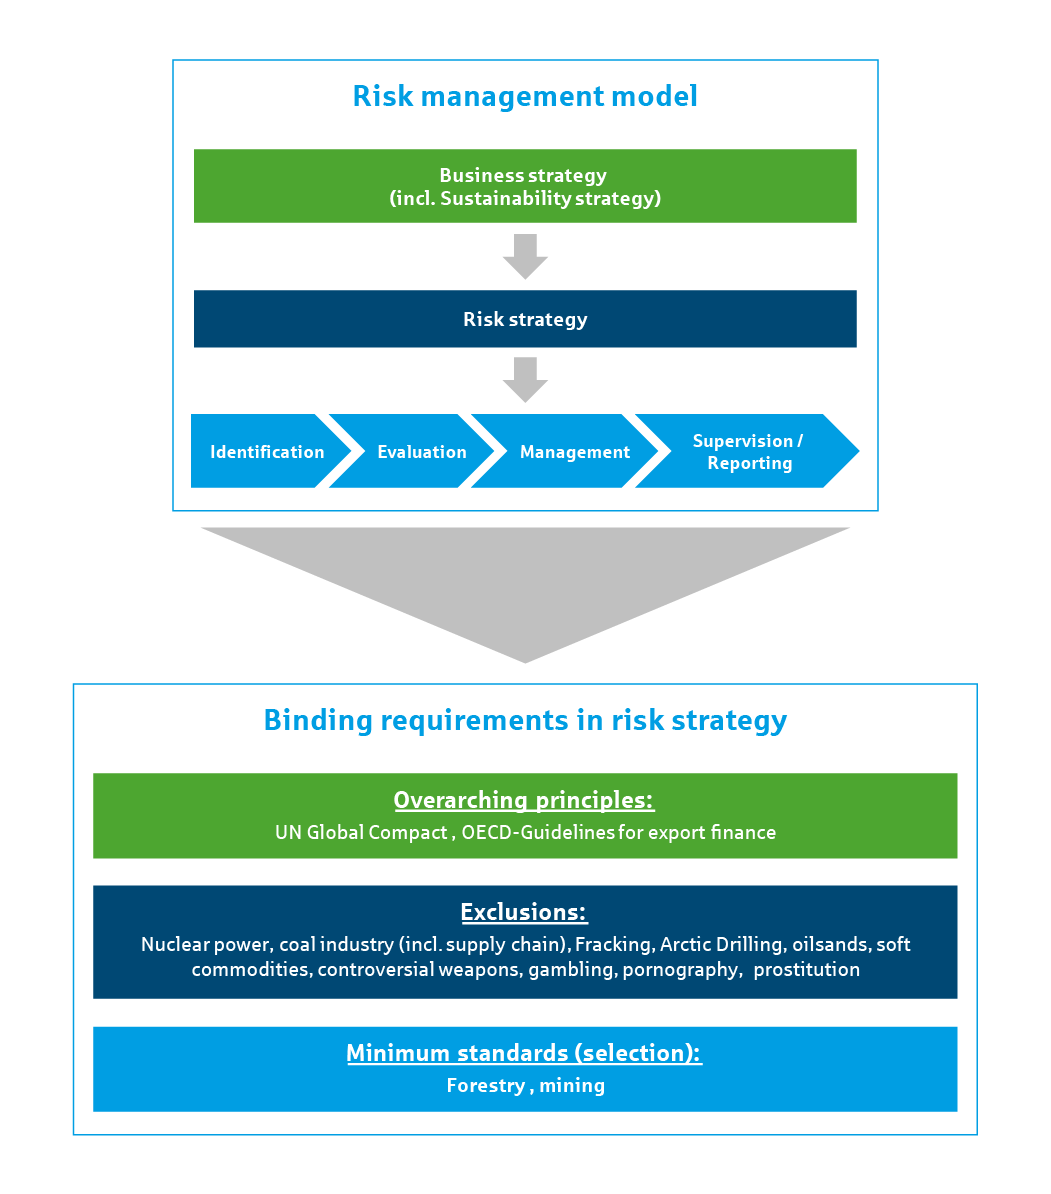 The risk management model and the binding requirements in Helaba's risk strategy.